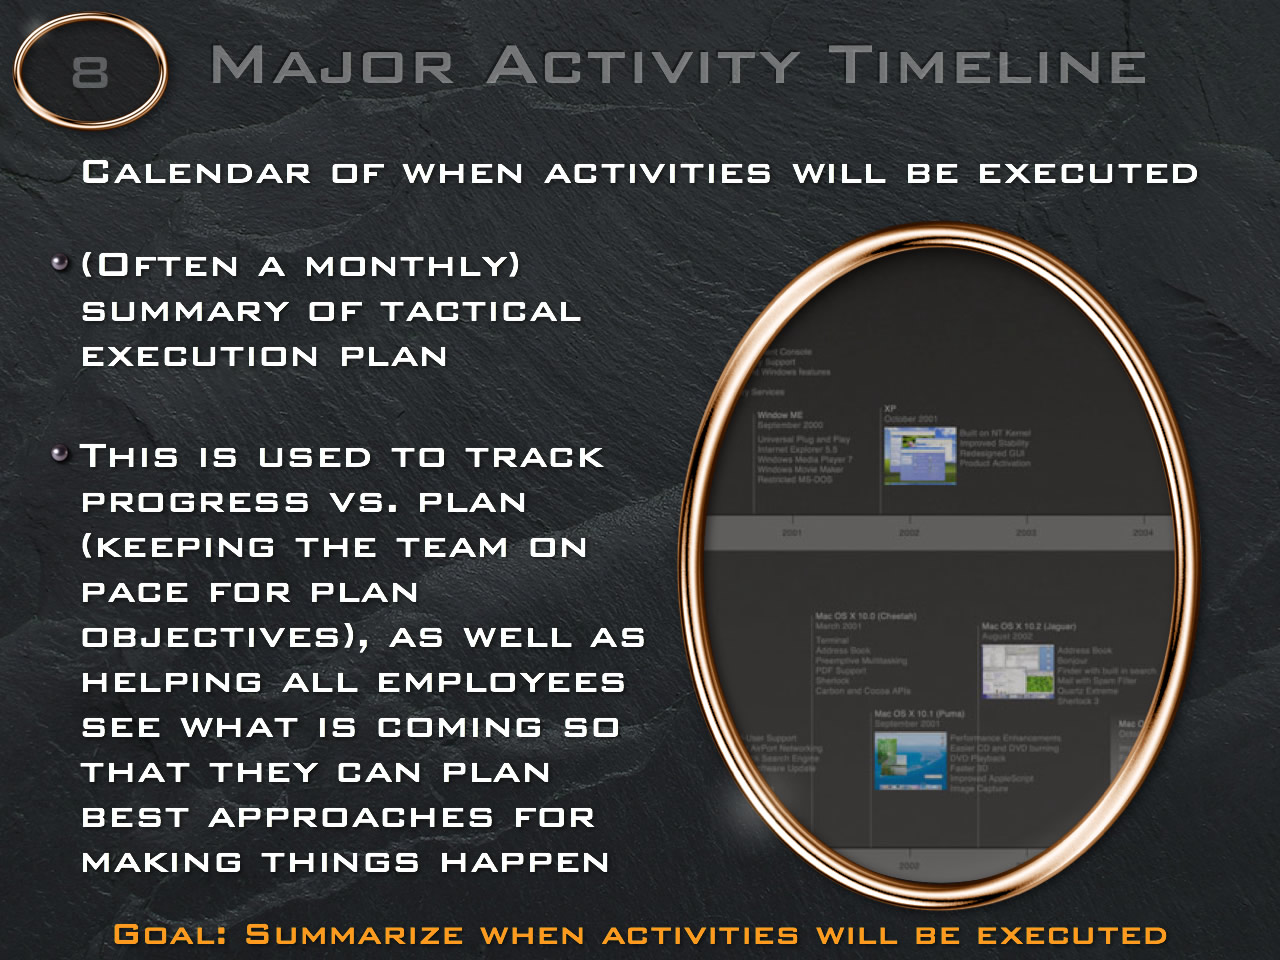 Creating milestones in a major activity timeline as an at-a-glance tool to help track progress against the plan